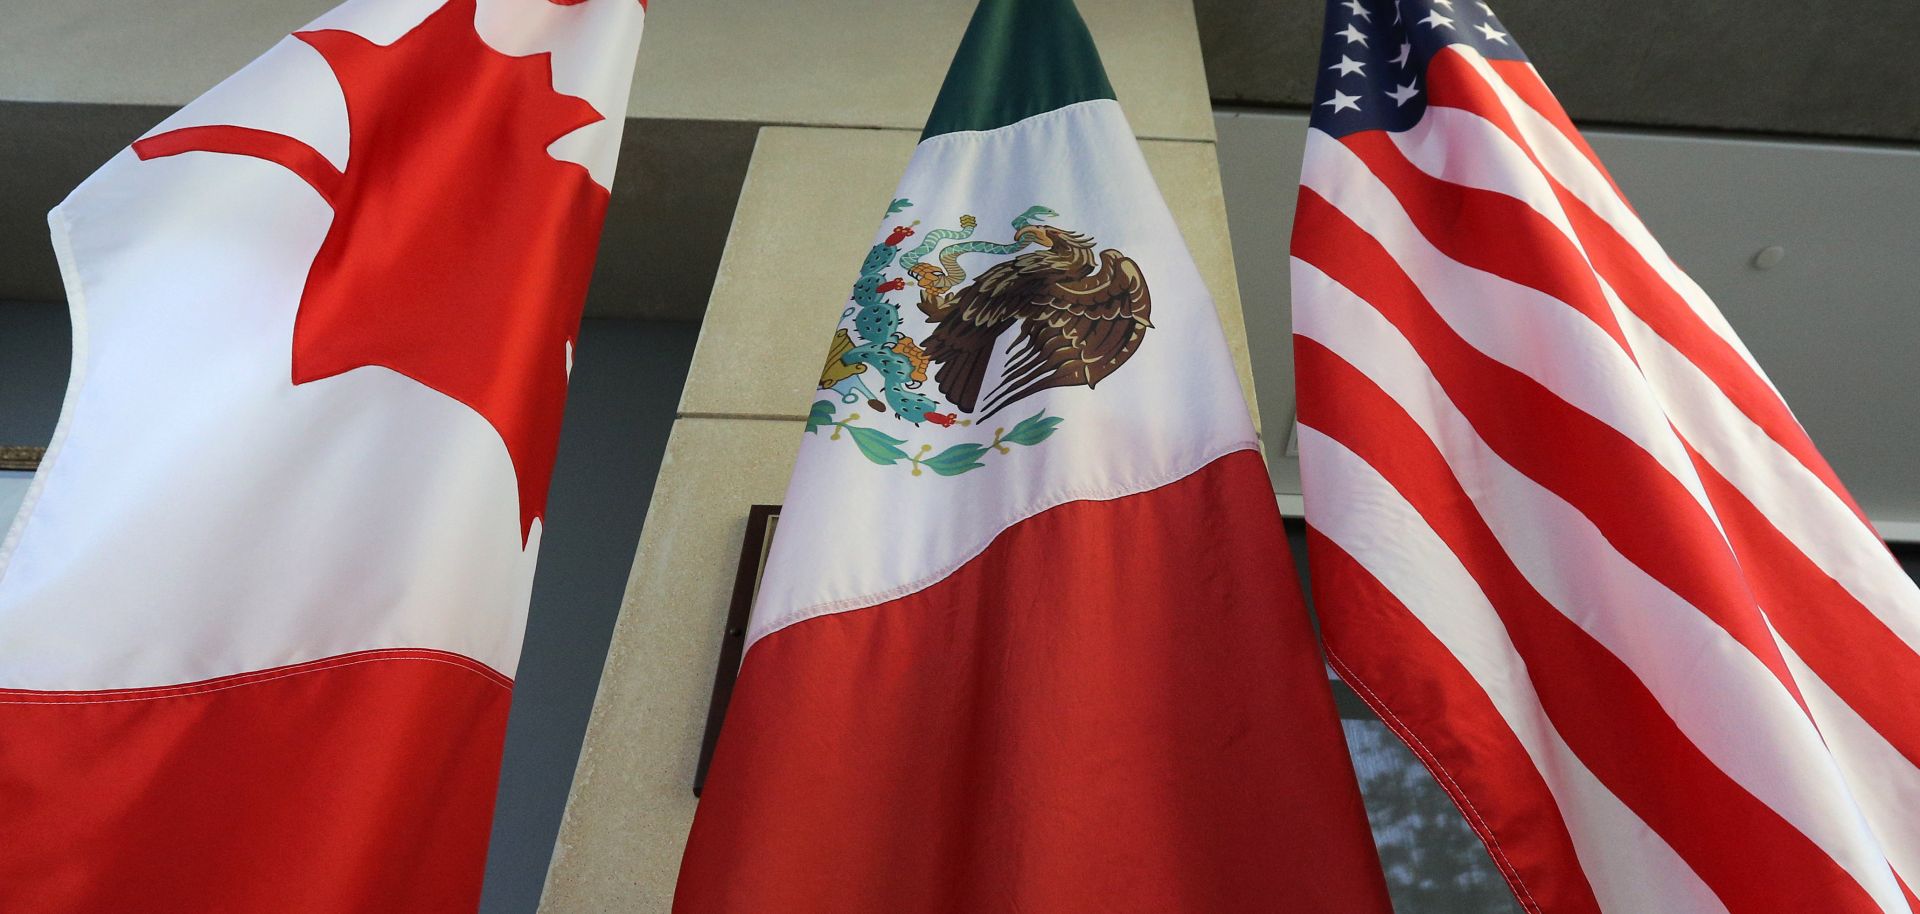 The flags of Canada, Mexico and the United States hang outside the negotiating room during the third round of talks in September to revise the North American Free Trade Agreement.